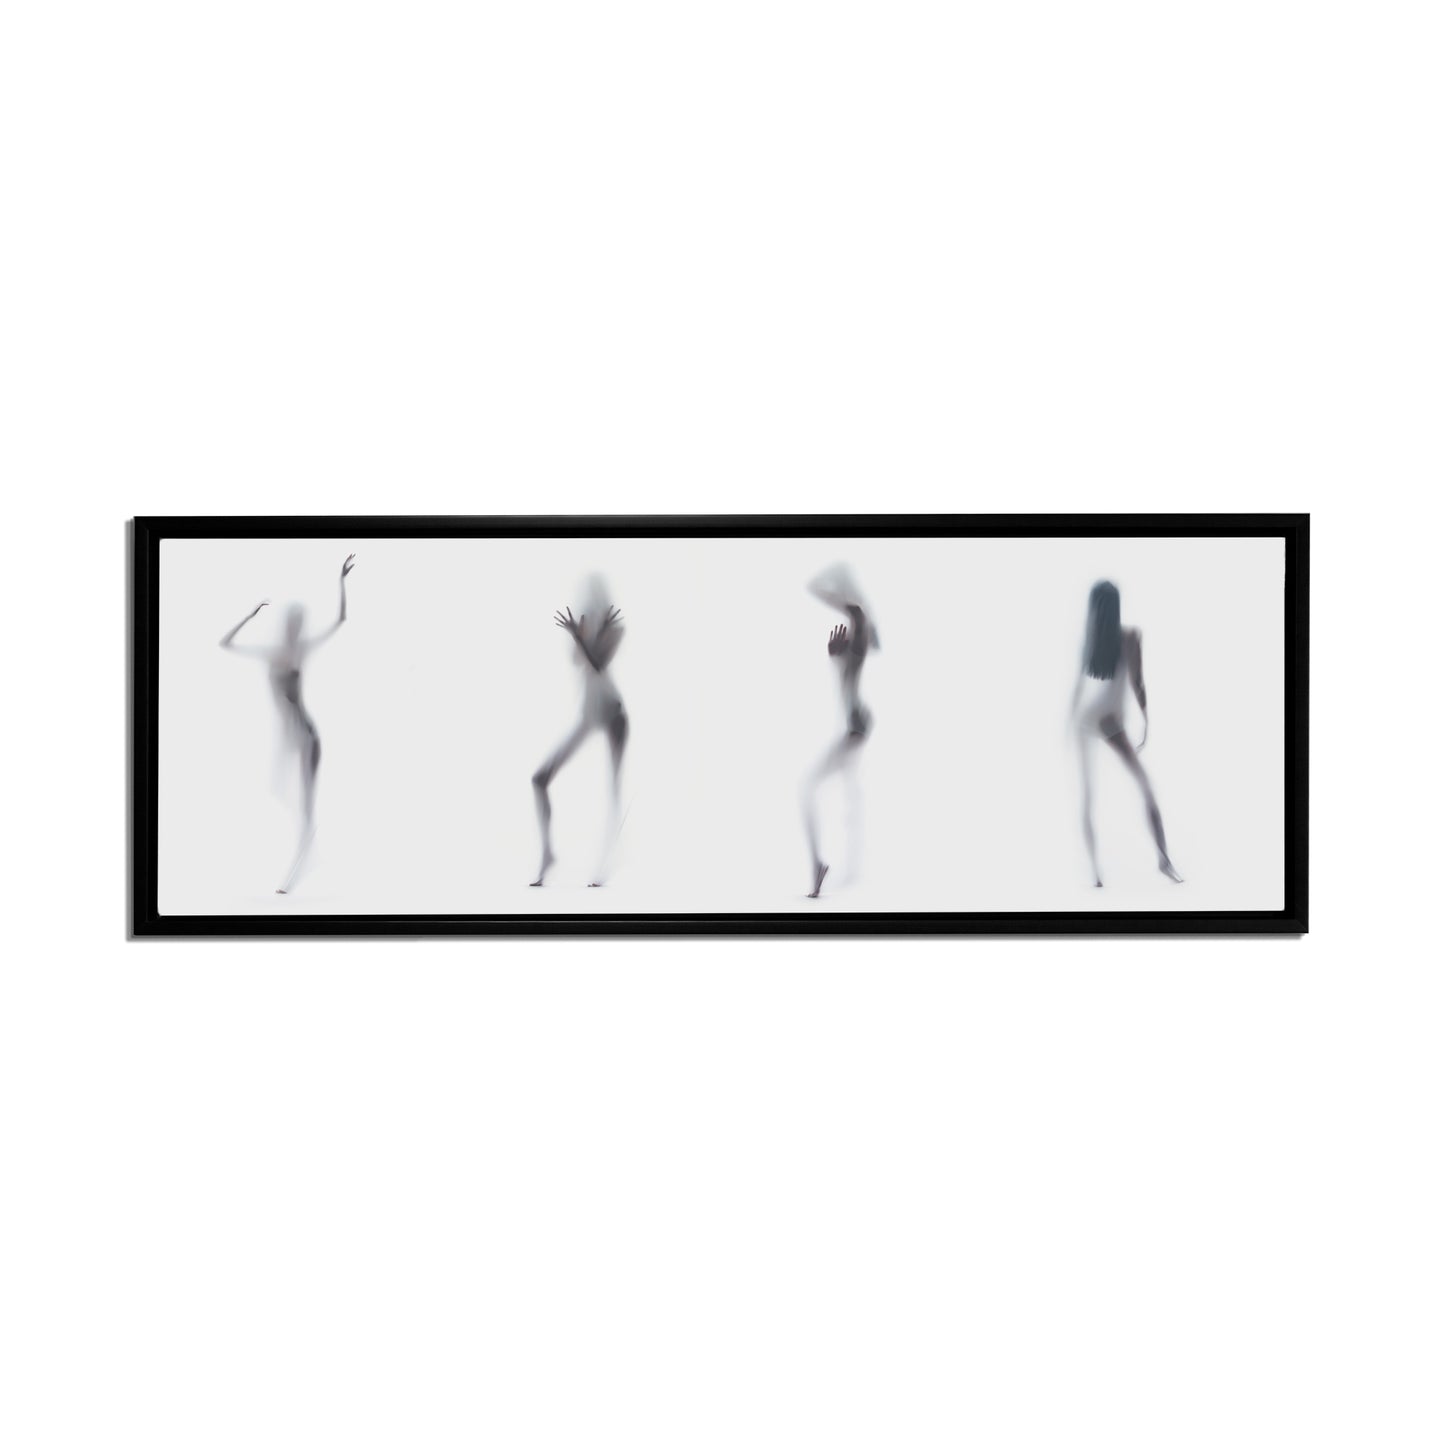 Abstract Wall Art-Silhouette of 4 Women-Canvas Printed